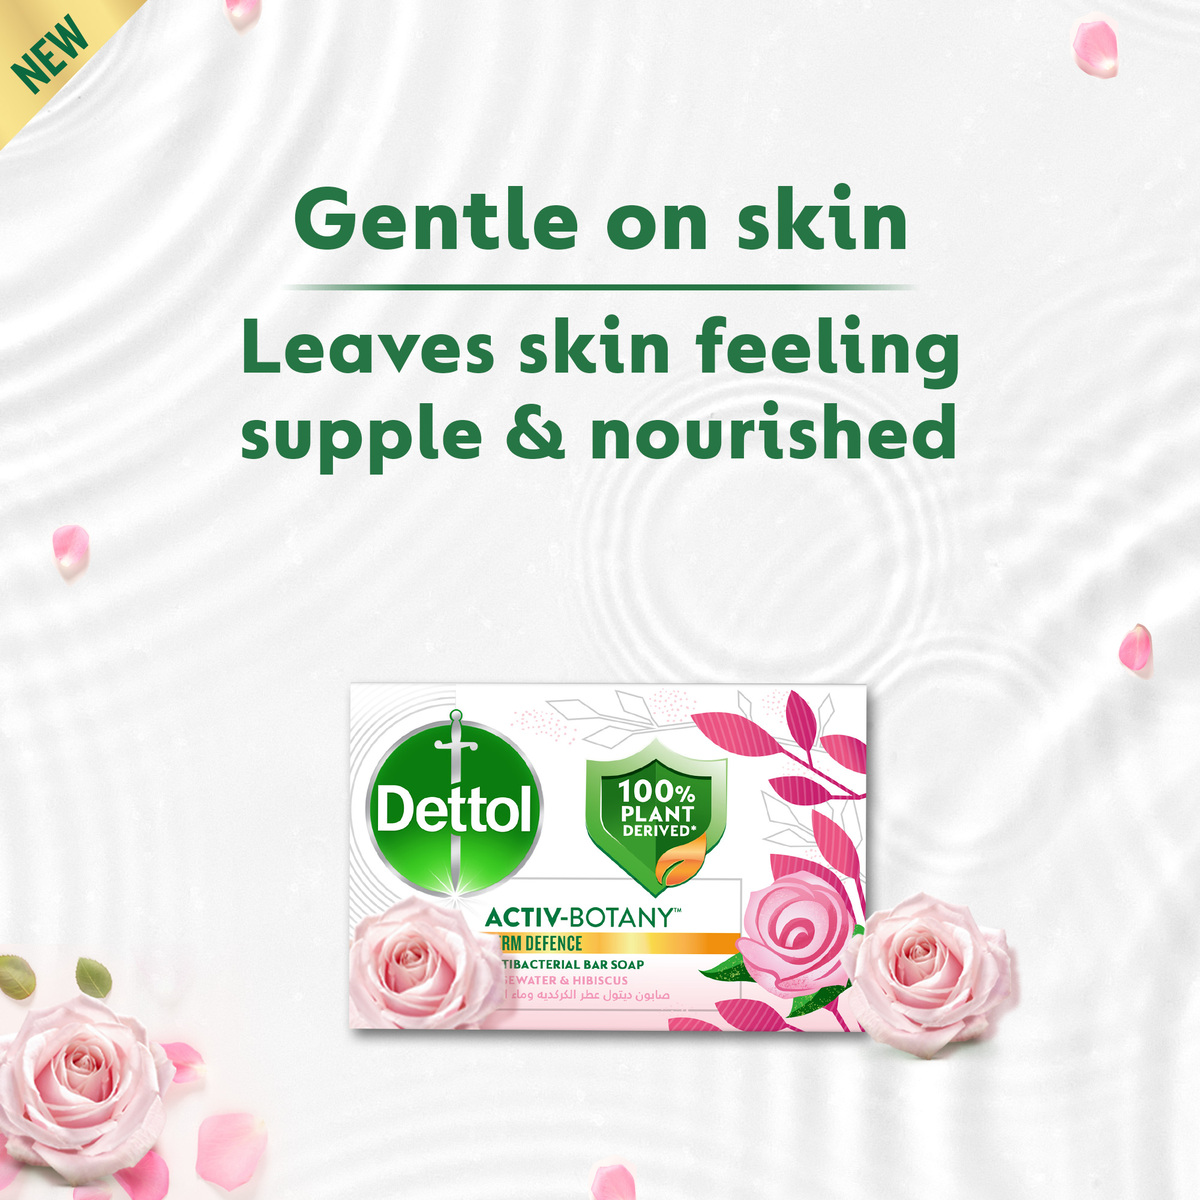 Dettol Activ-Botany Rosewater & Hibiscus Antibacterial Bar Soap Value Pack 4 x 150 g